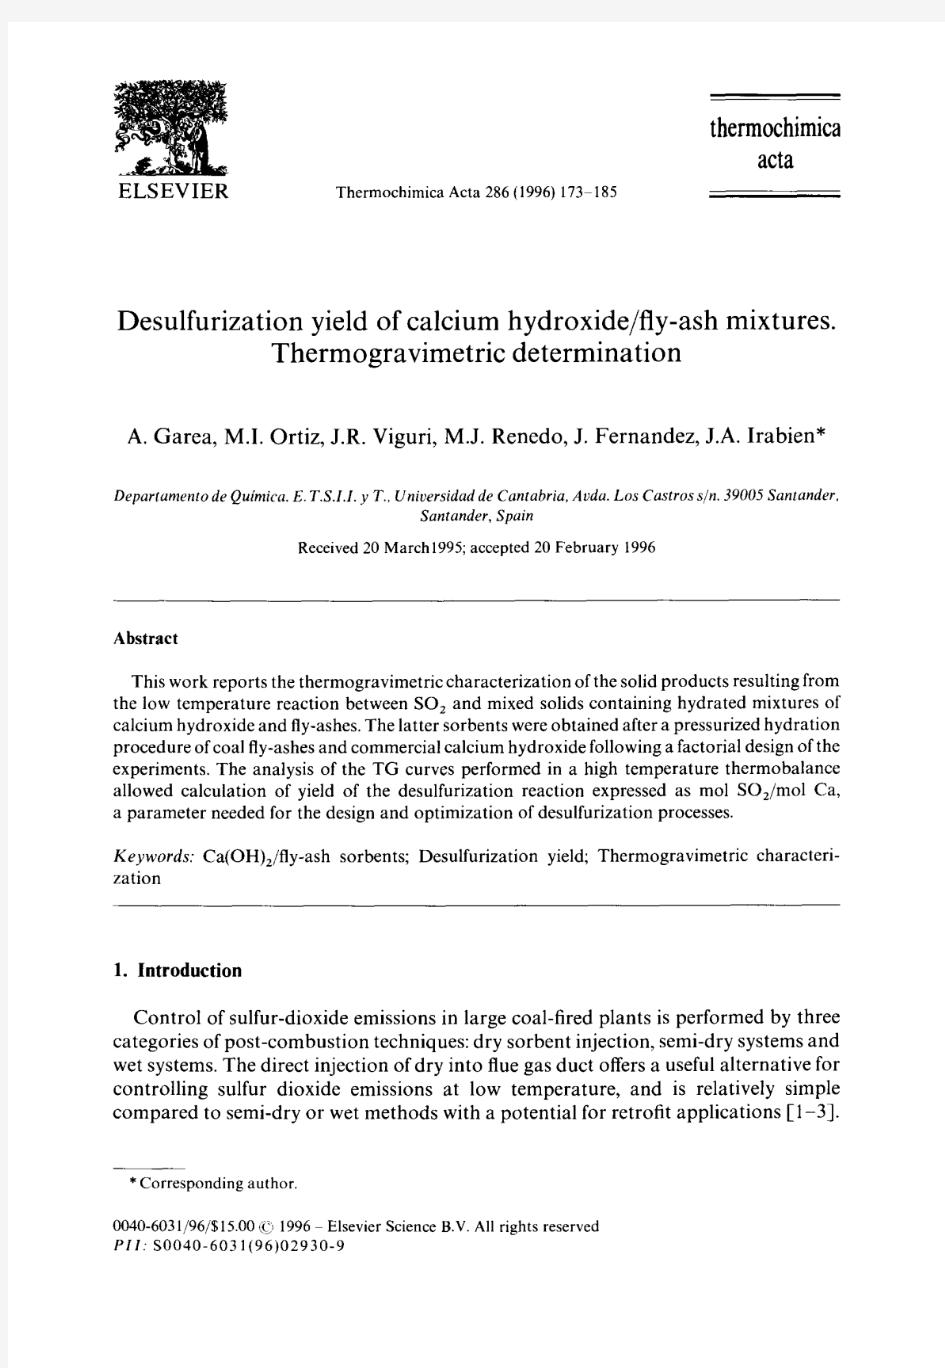 Desulfurization yield of calcium hydroxide fly-ash mixtures